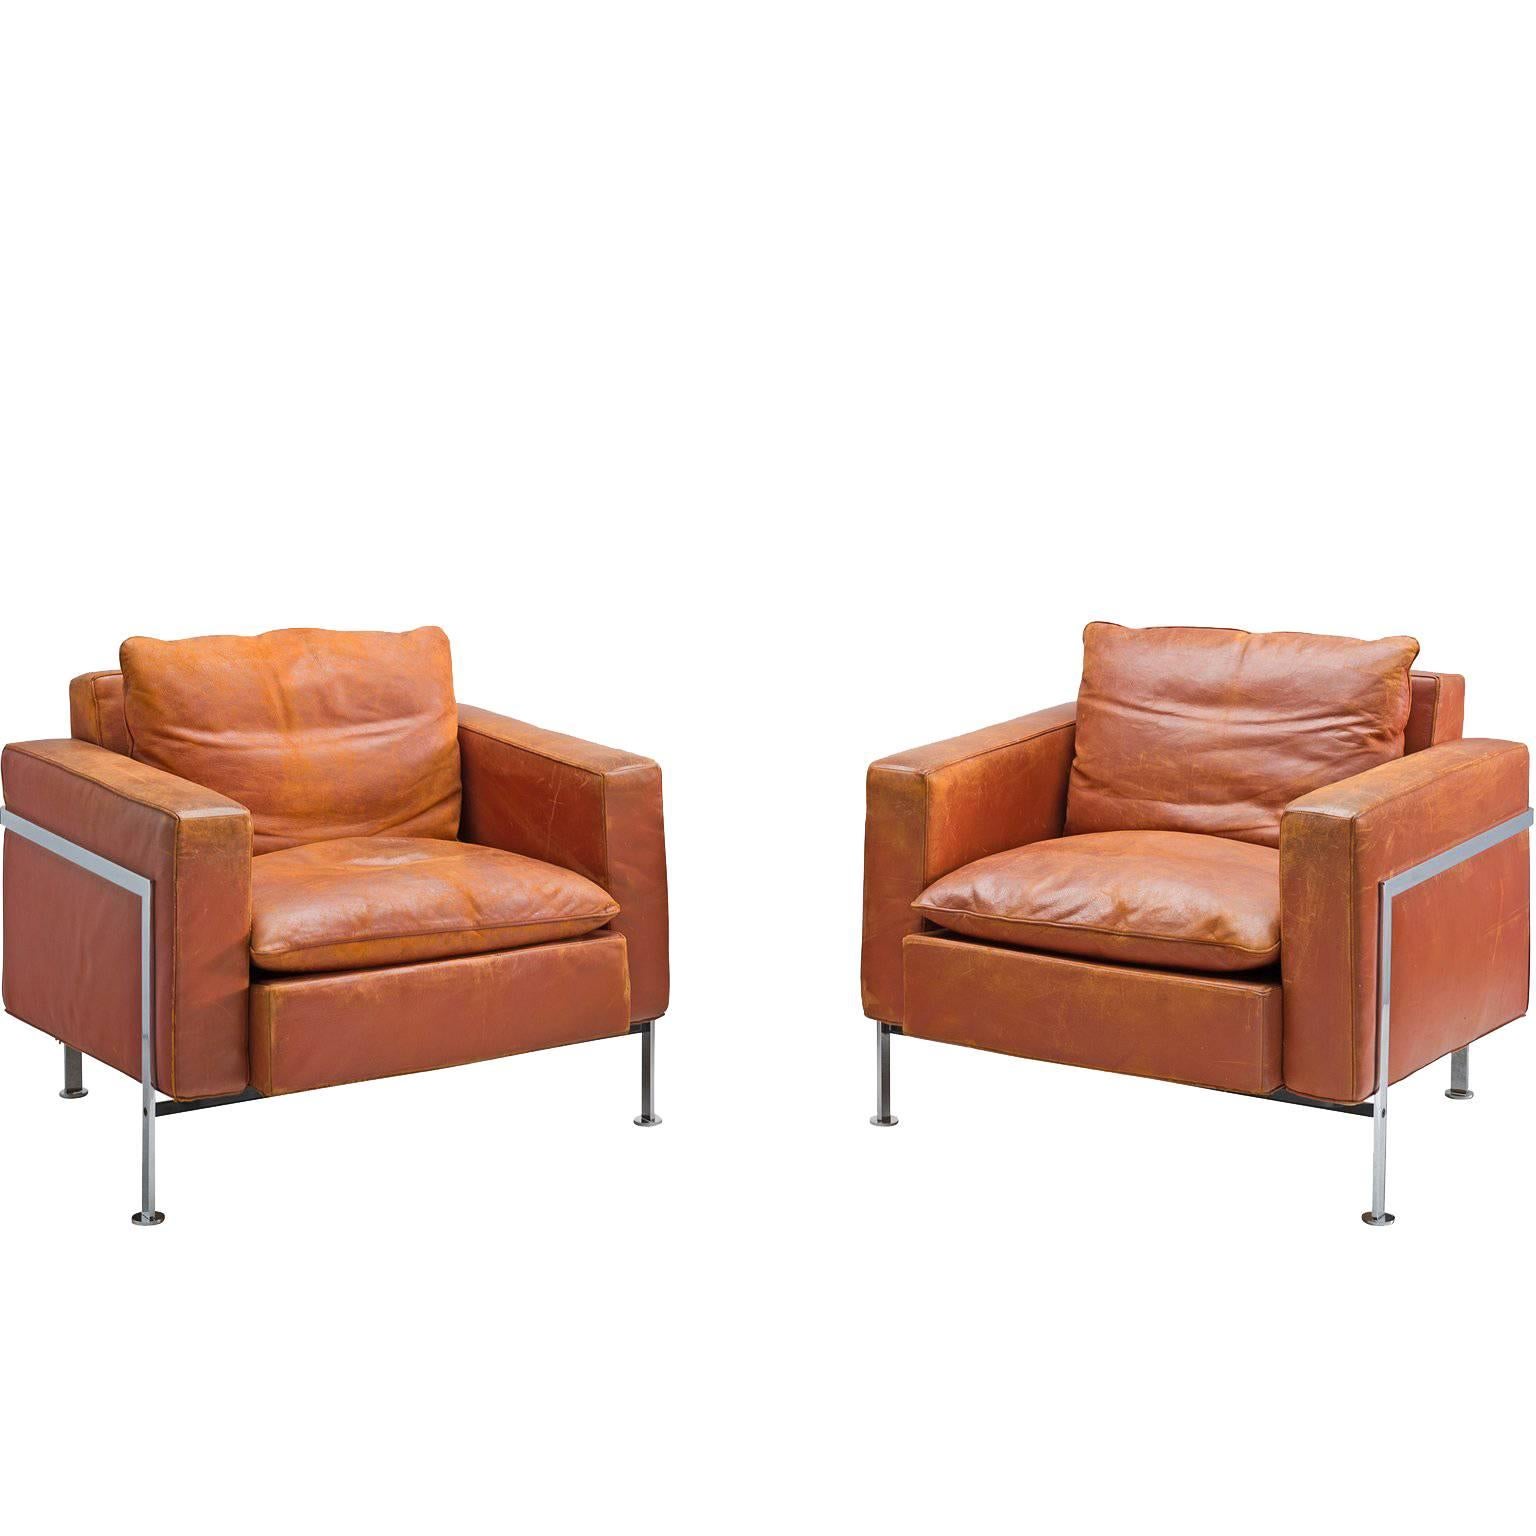 Robert Hausmann Pair of Cognac Leather Lounge Chairs for Desede Switzerland 1954